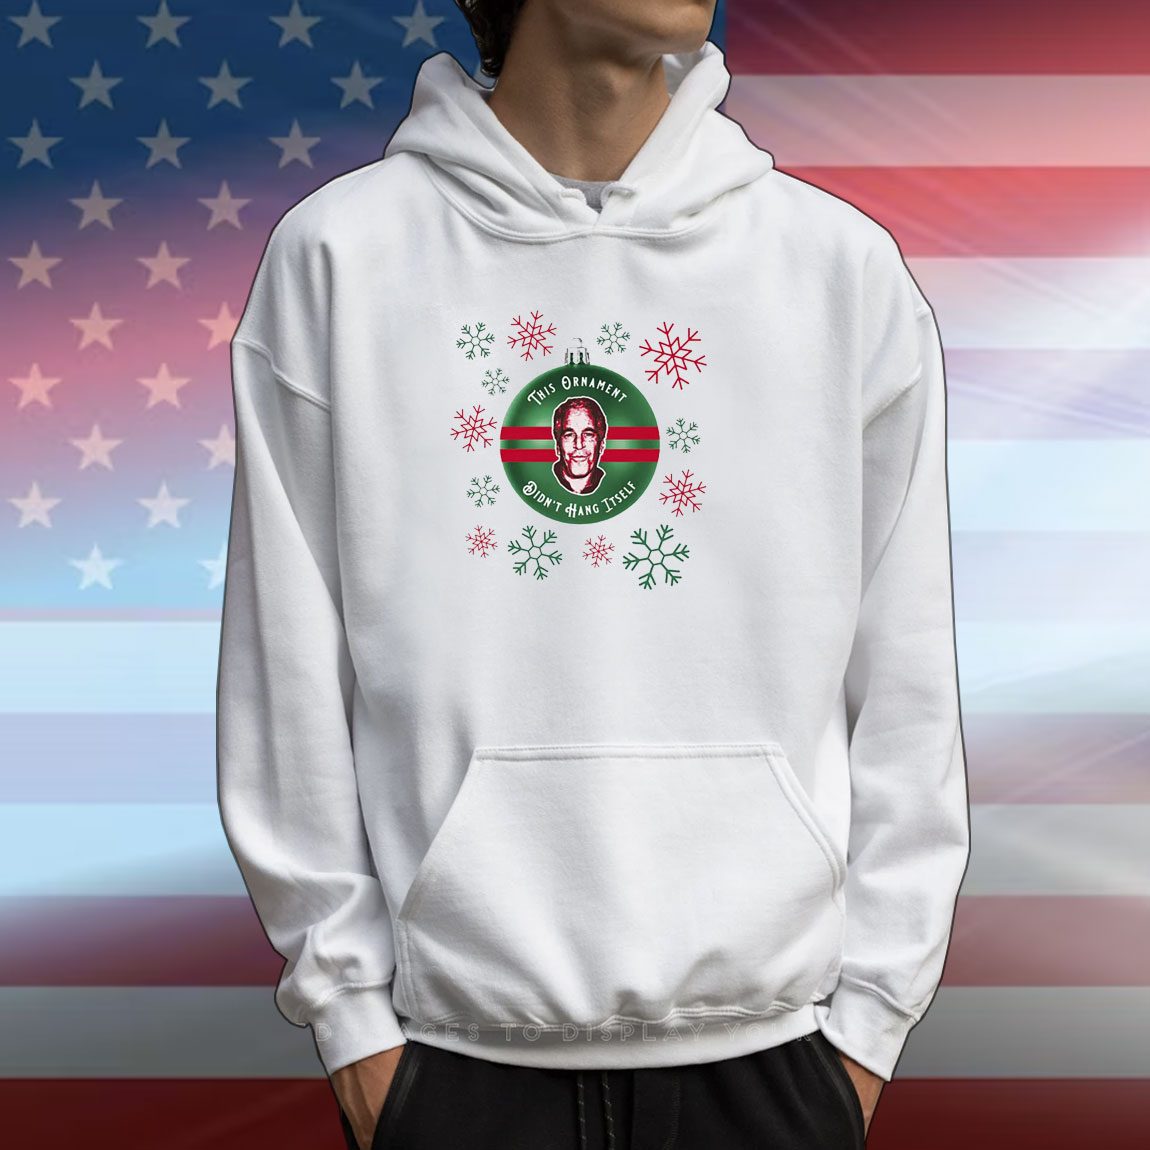 Let’s Get This Gingerbread Ugly Christmas Hoodie Shirt